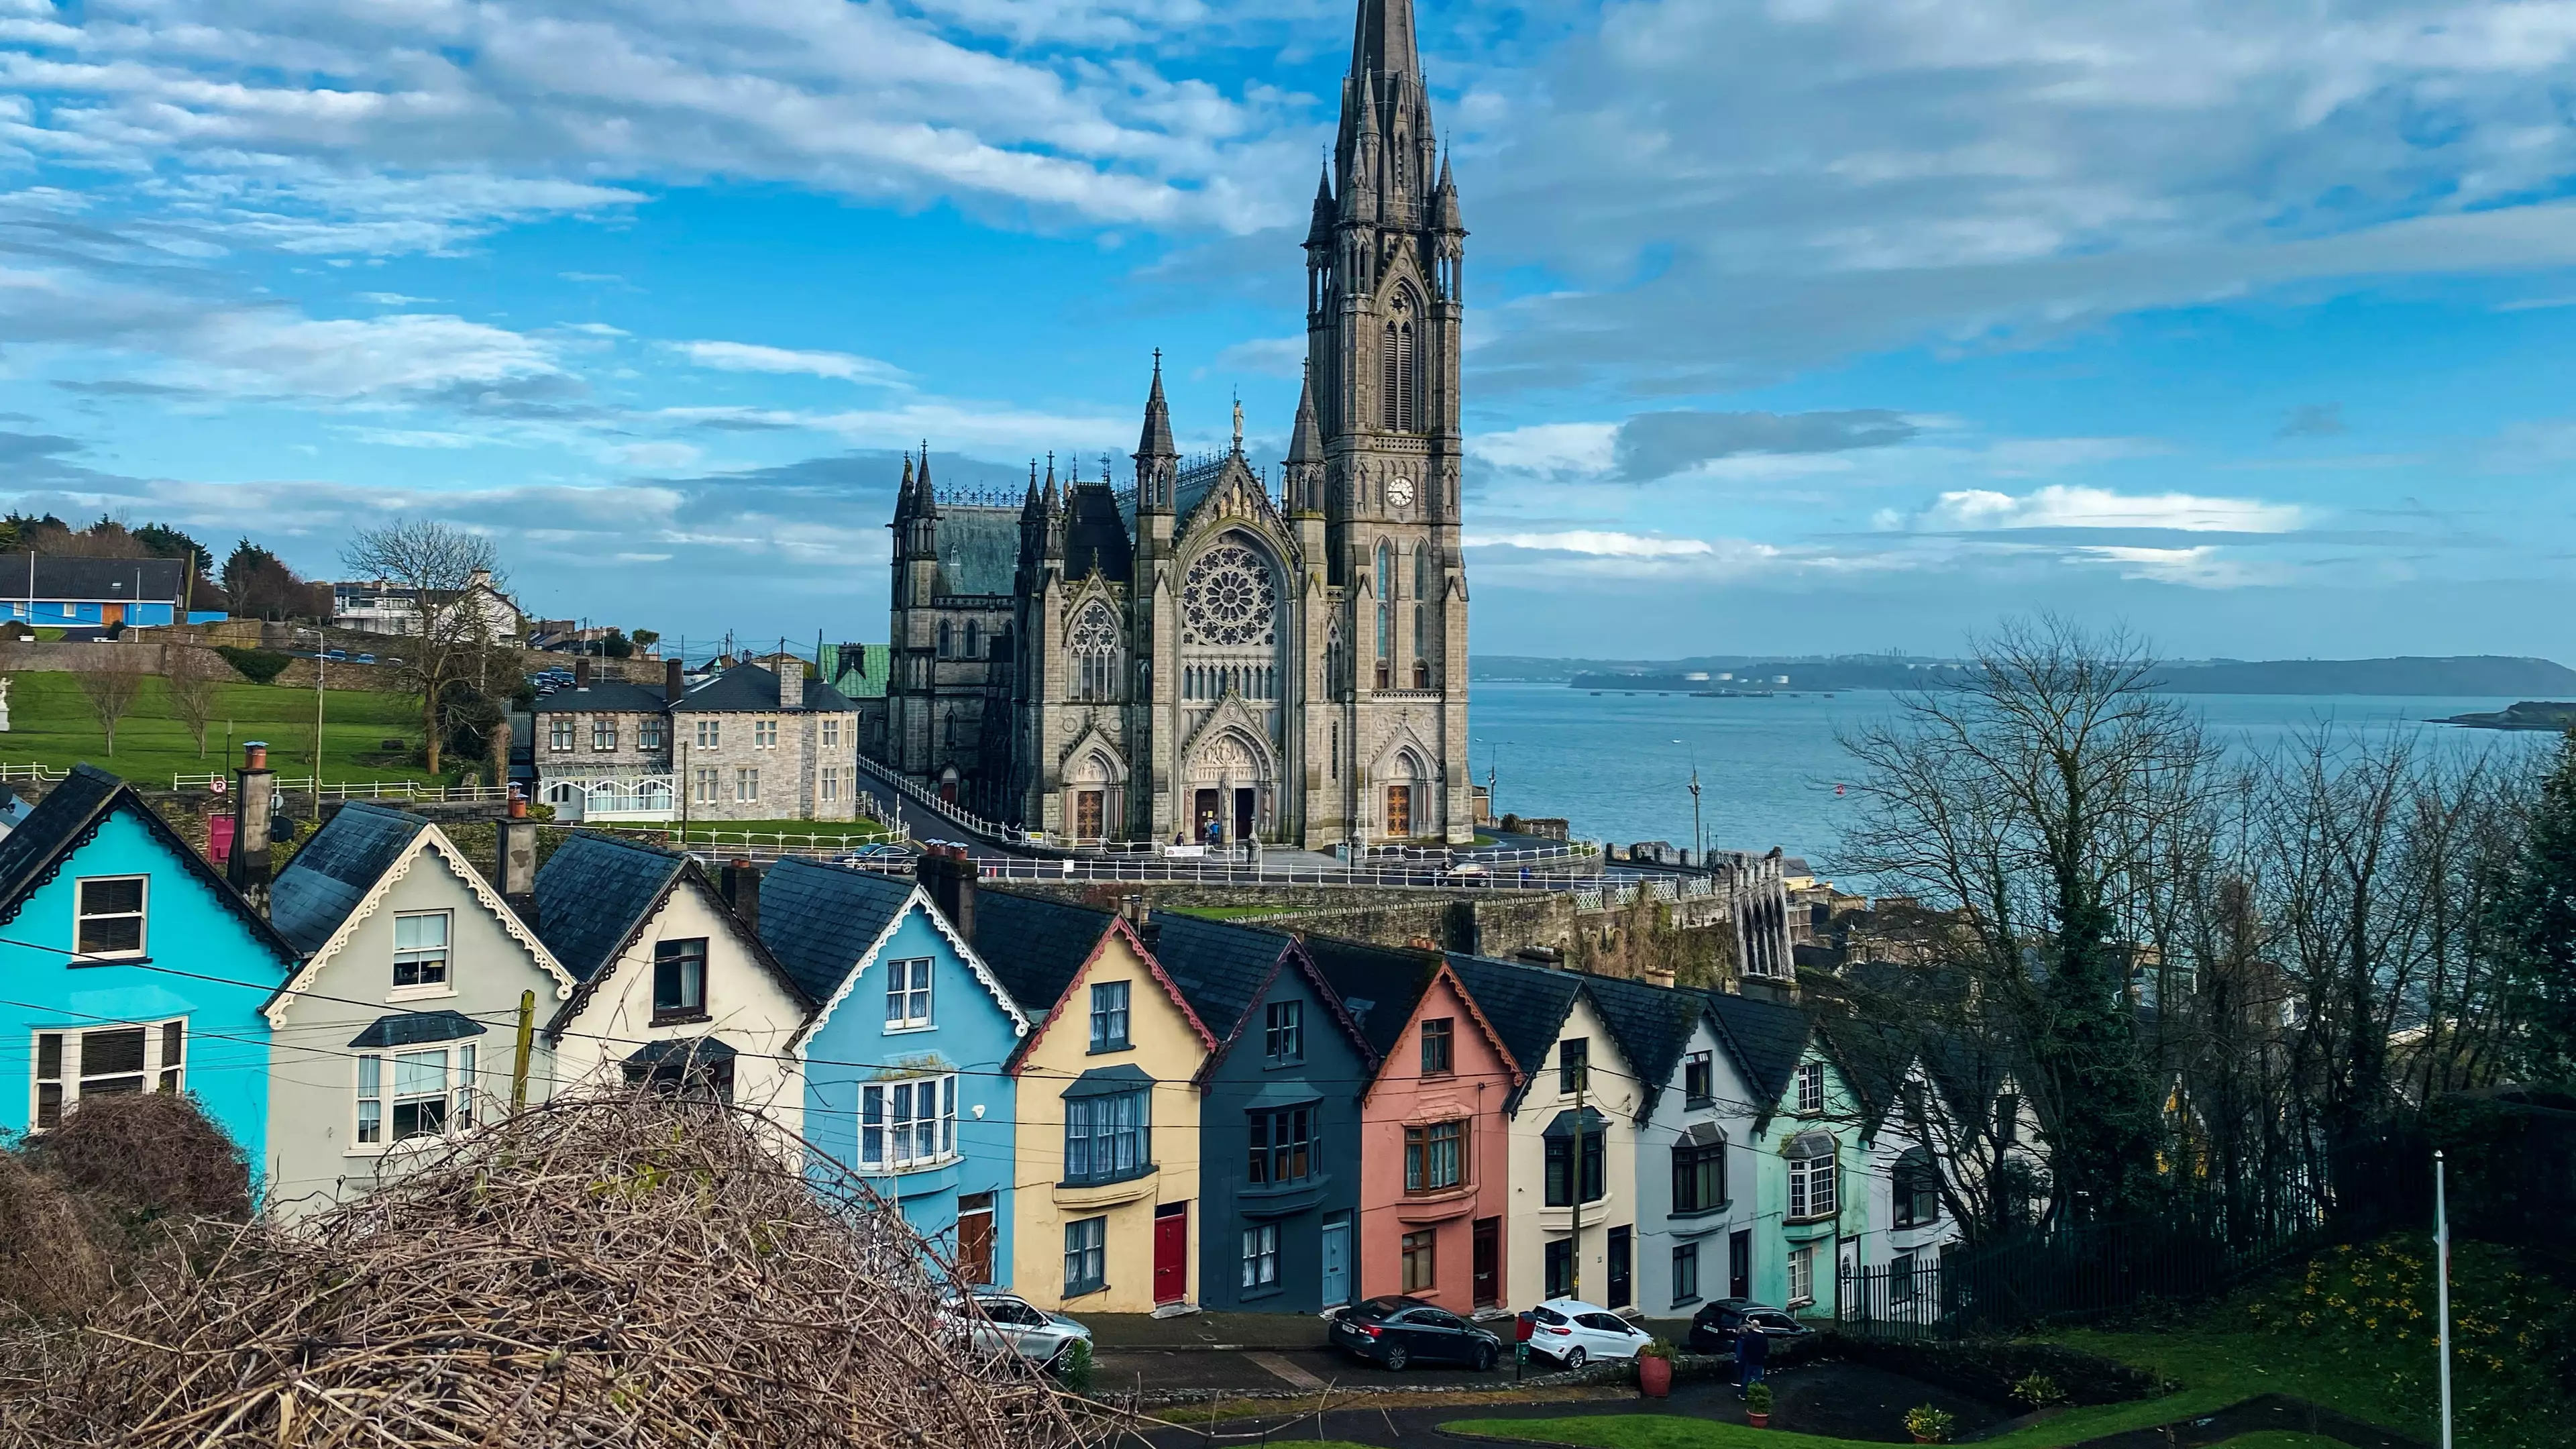 Cobh Named One Of The Most Beautiful Small Towns in Europe